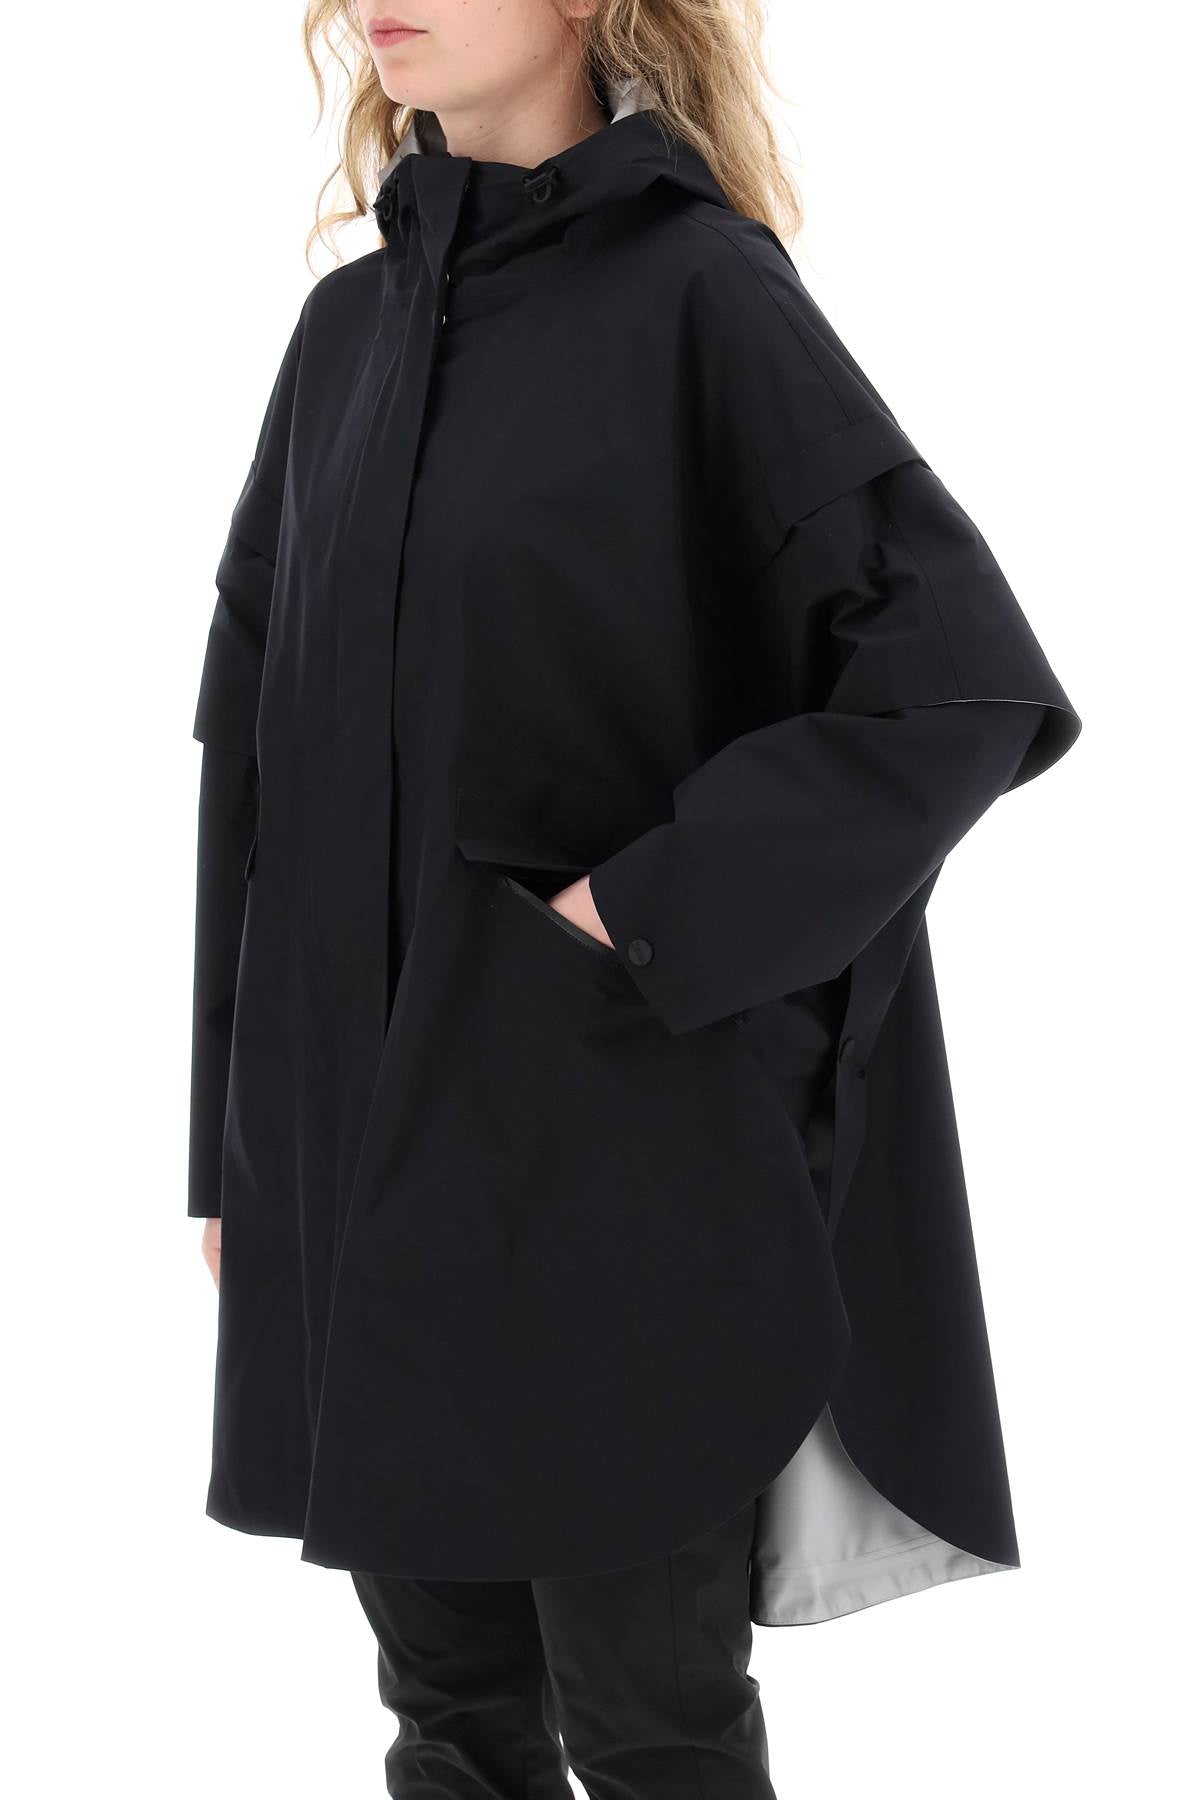 Herno laminar "removable sleeve cape coat-3